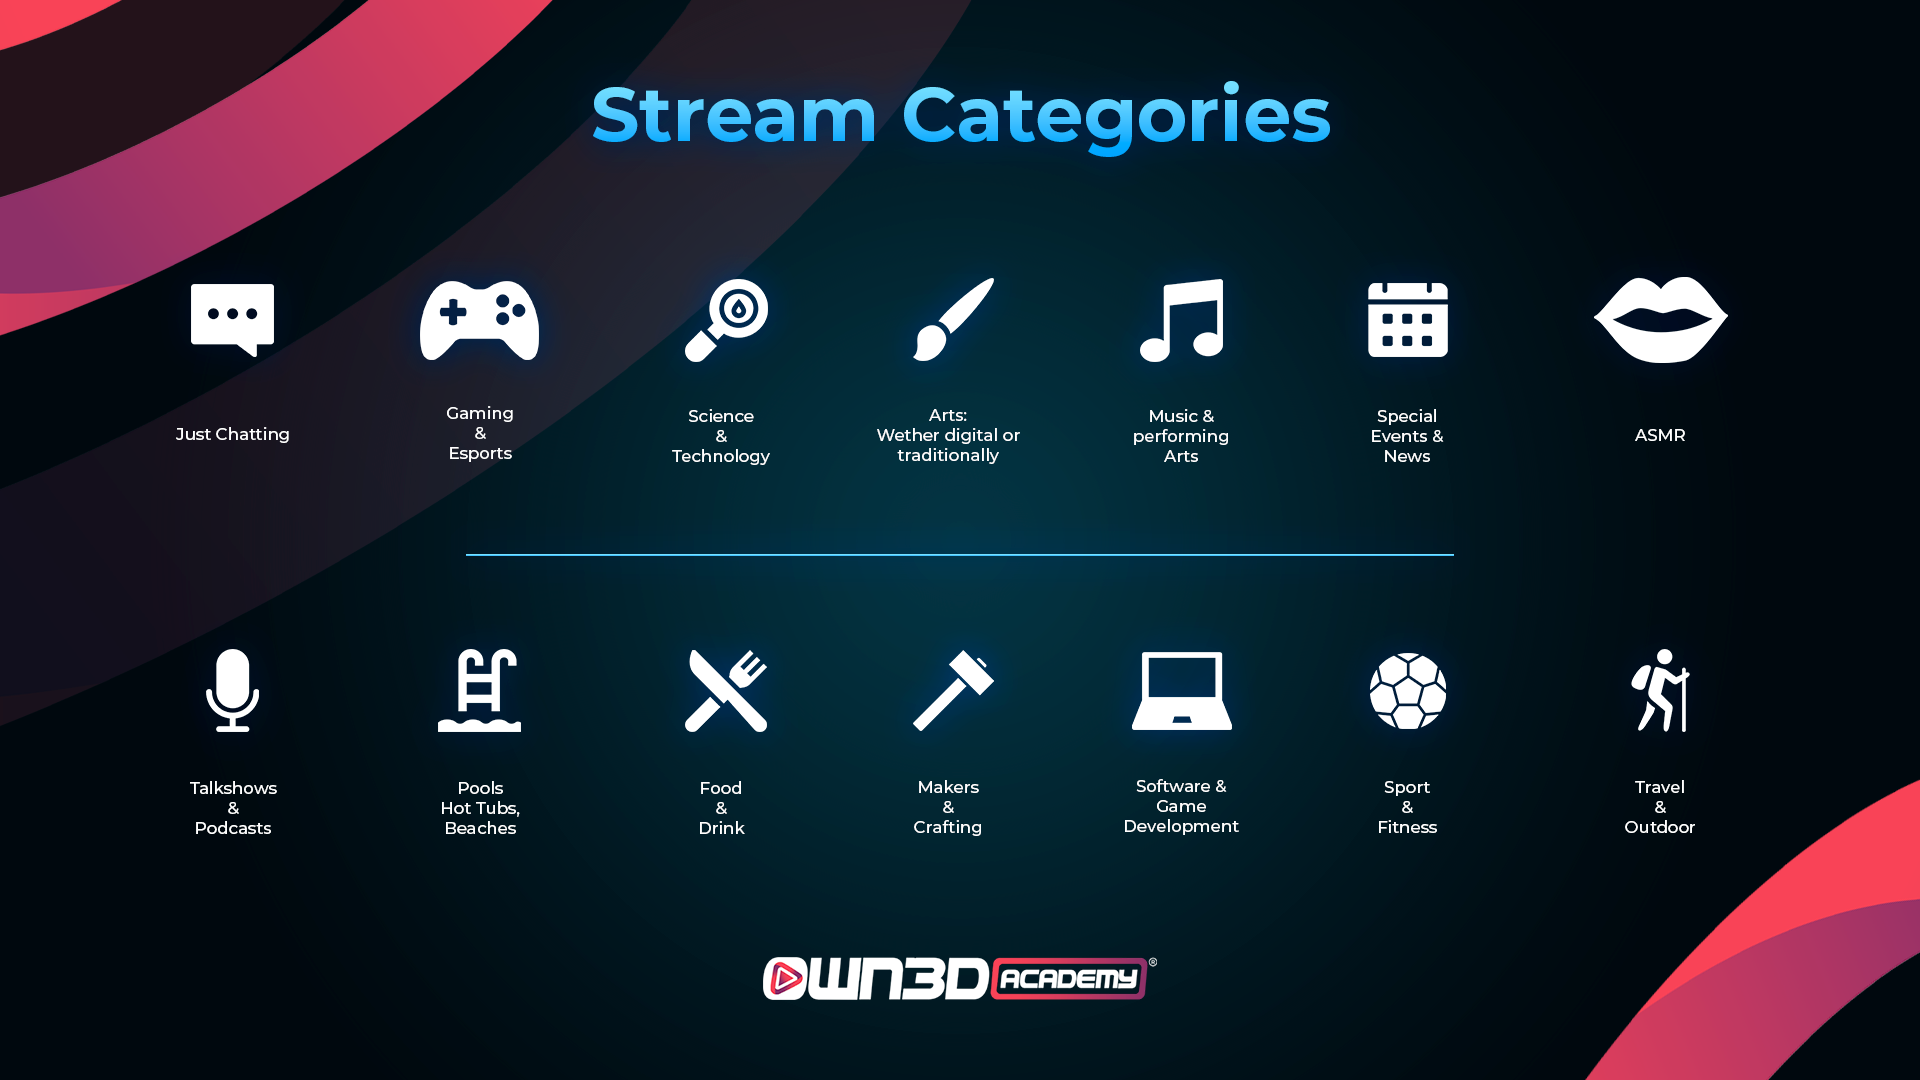 EN_General_What-do-you-want-to-stream_stream-categories.png